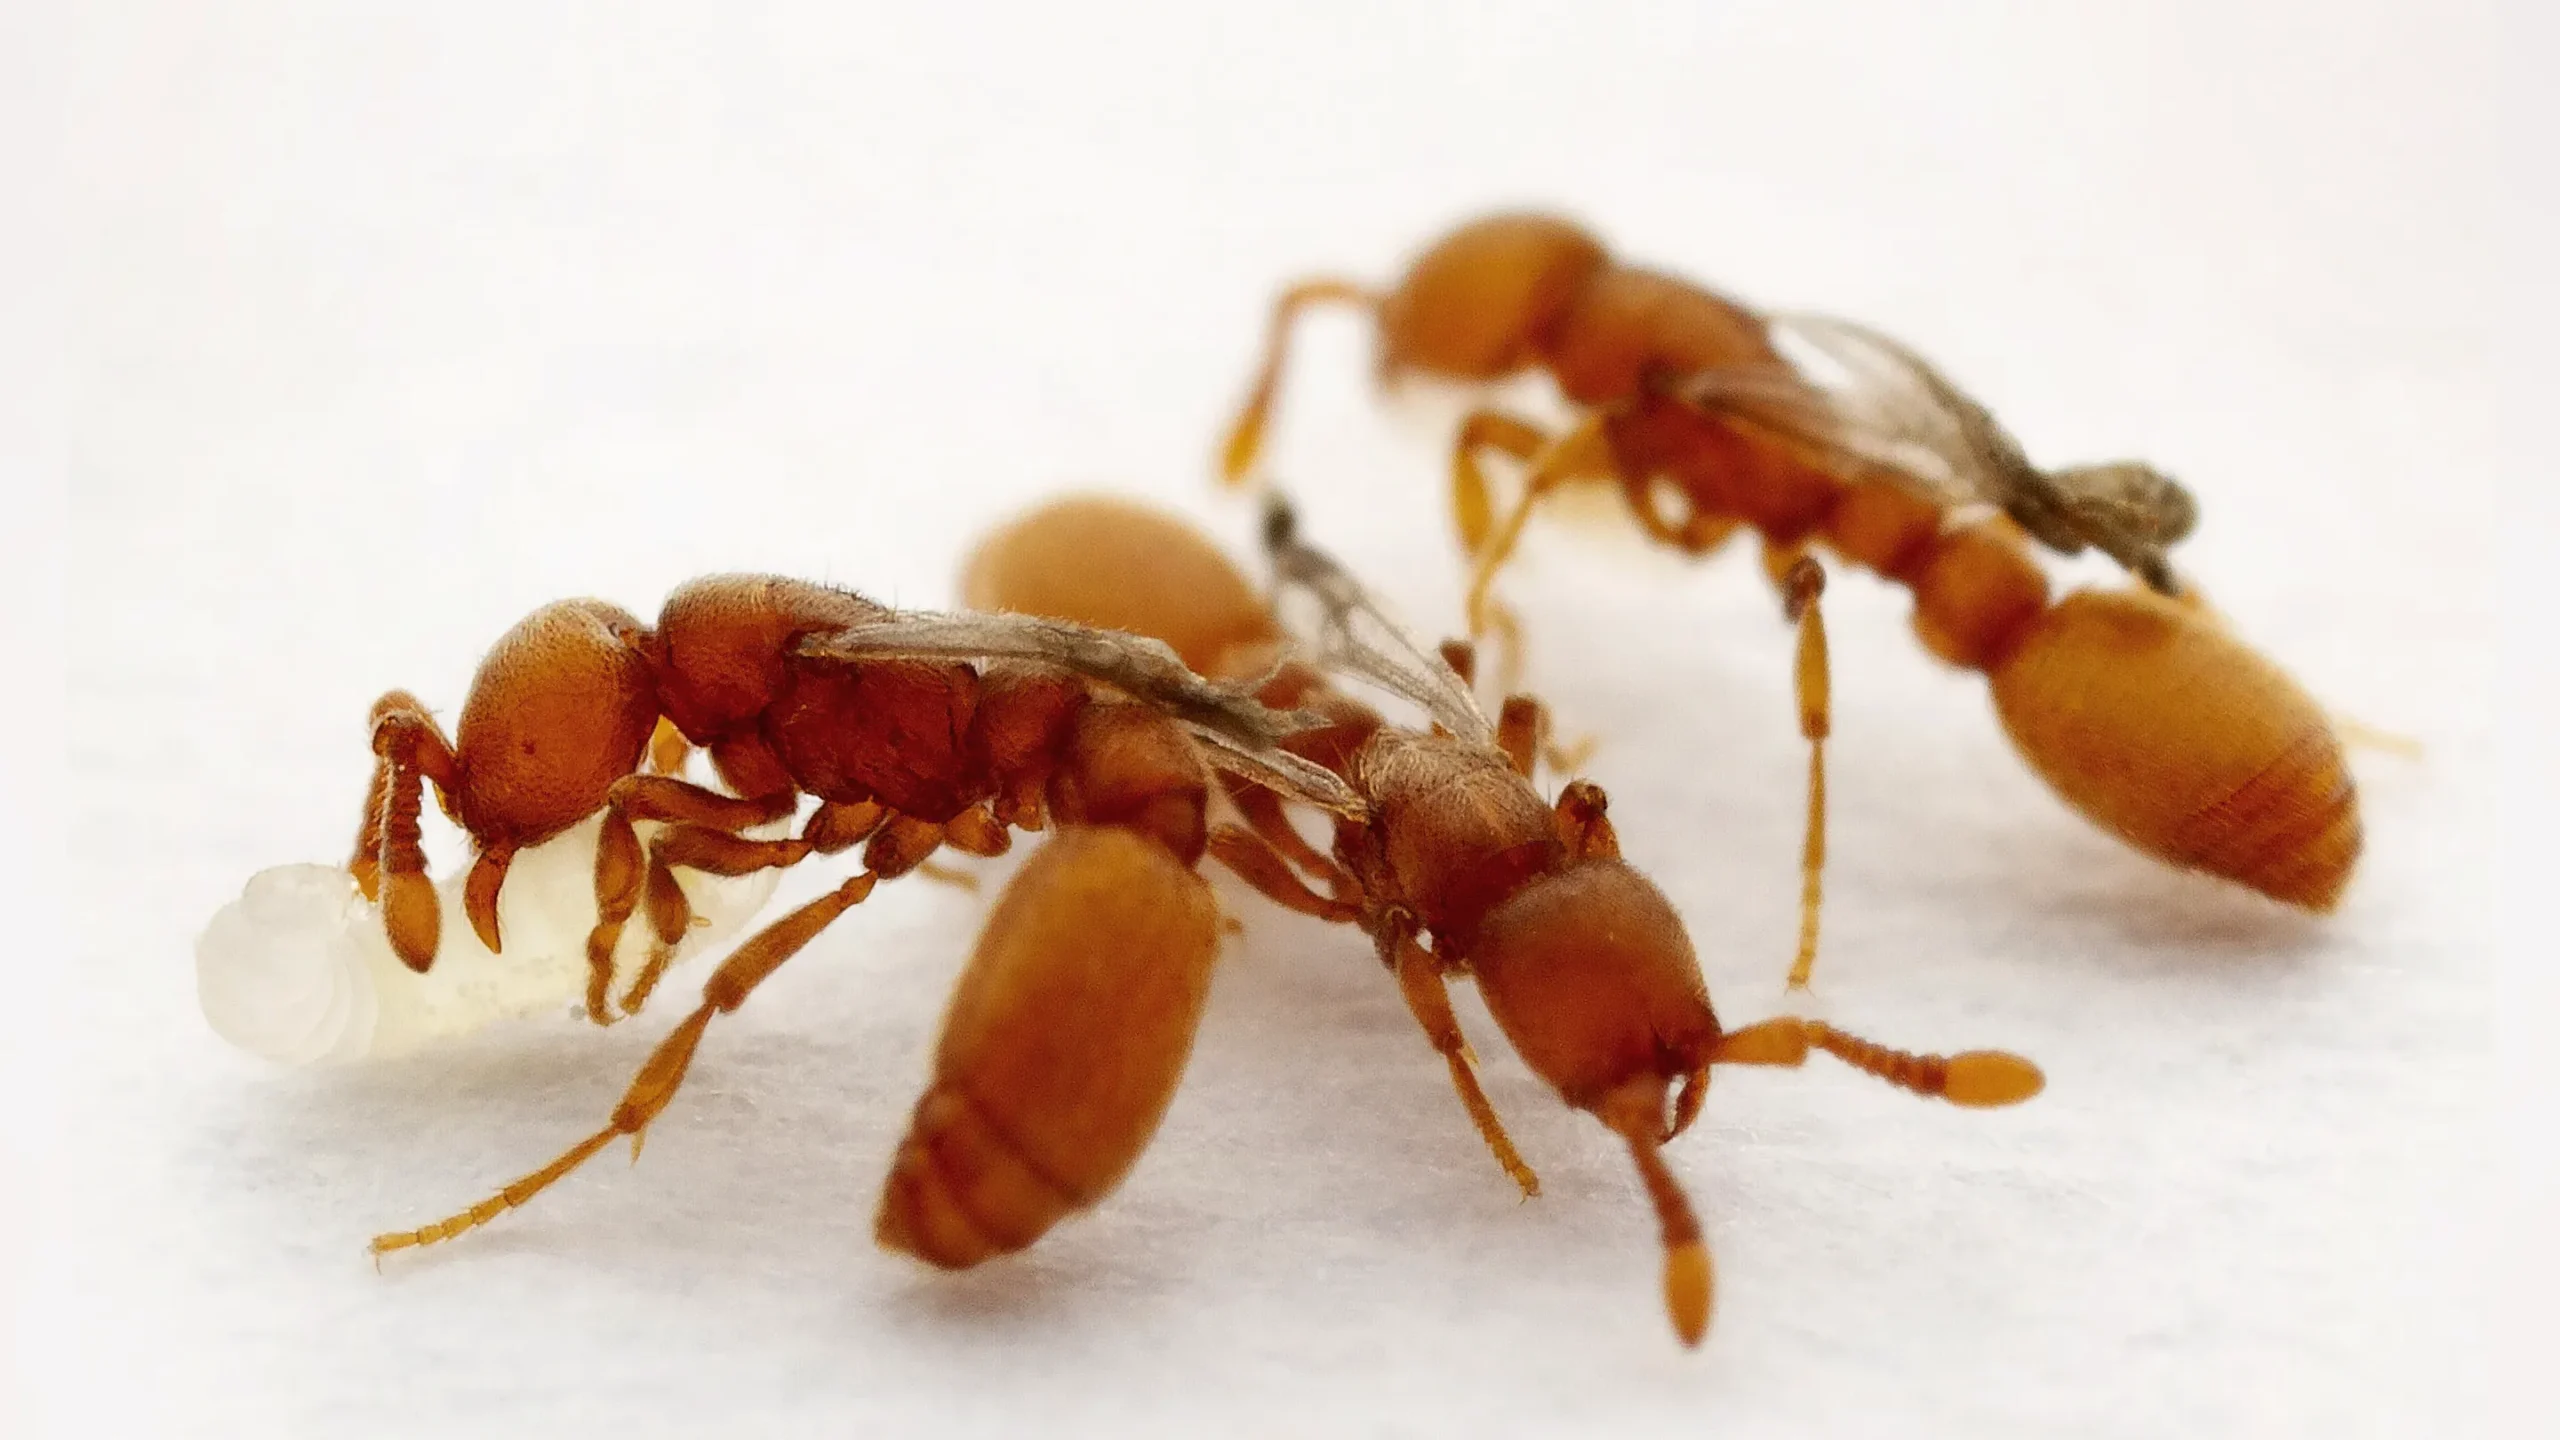 A Mutation Turned Ants Into Parasites in One Generation